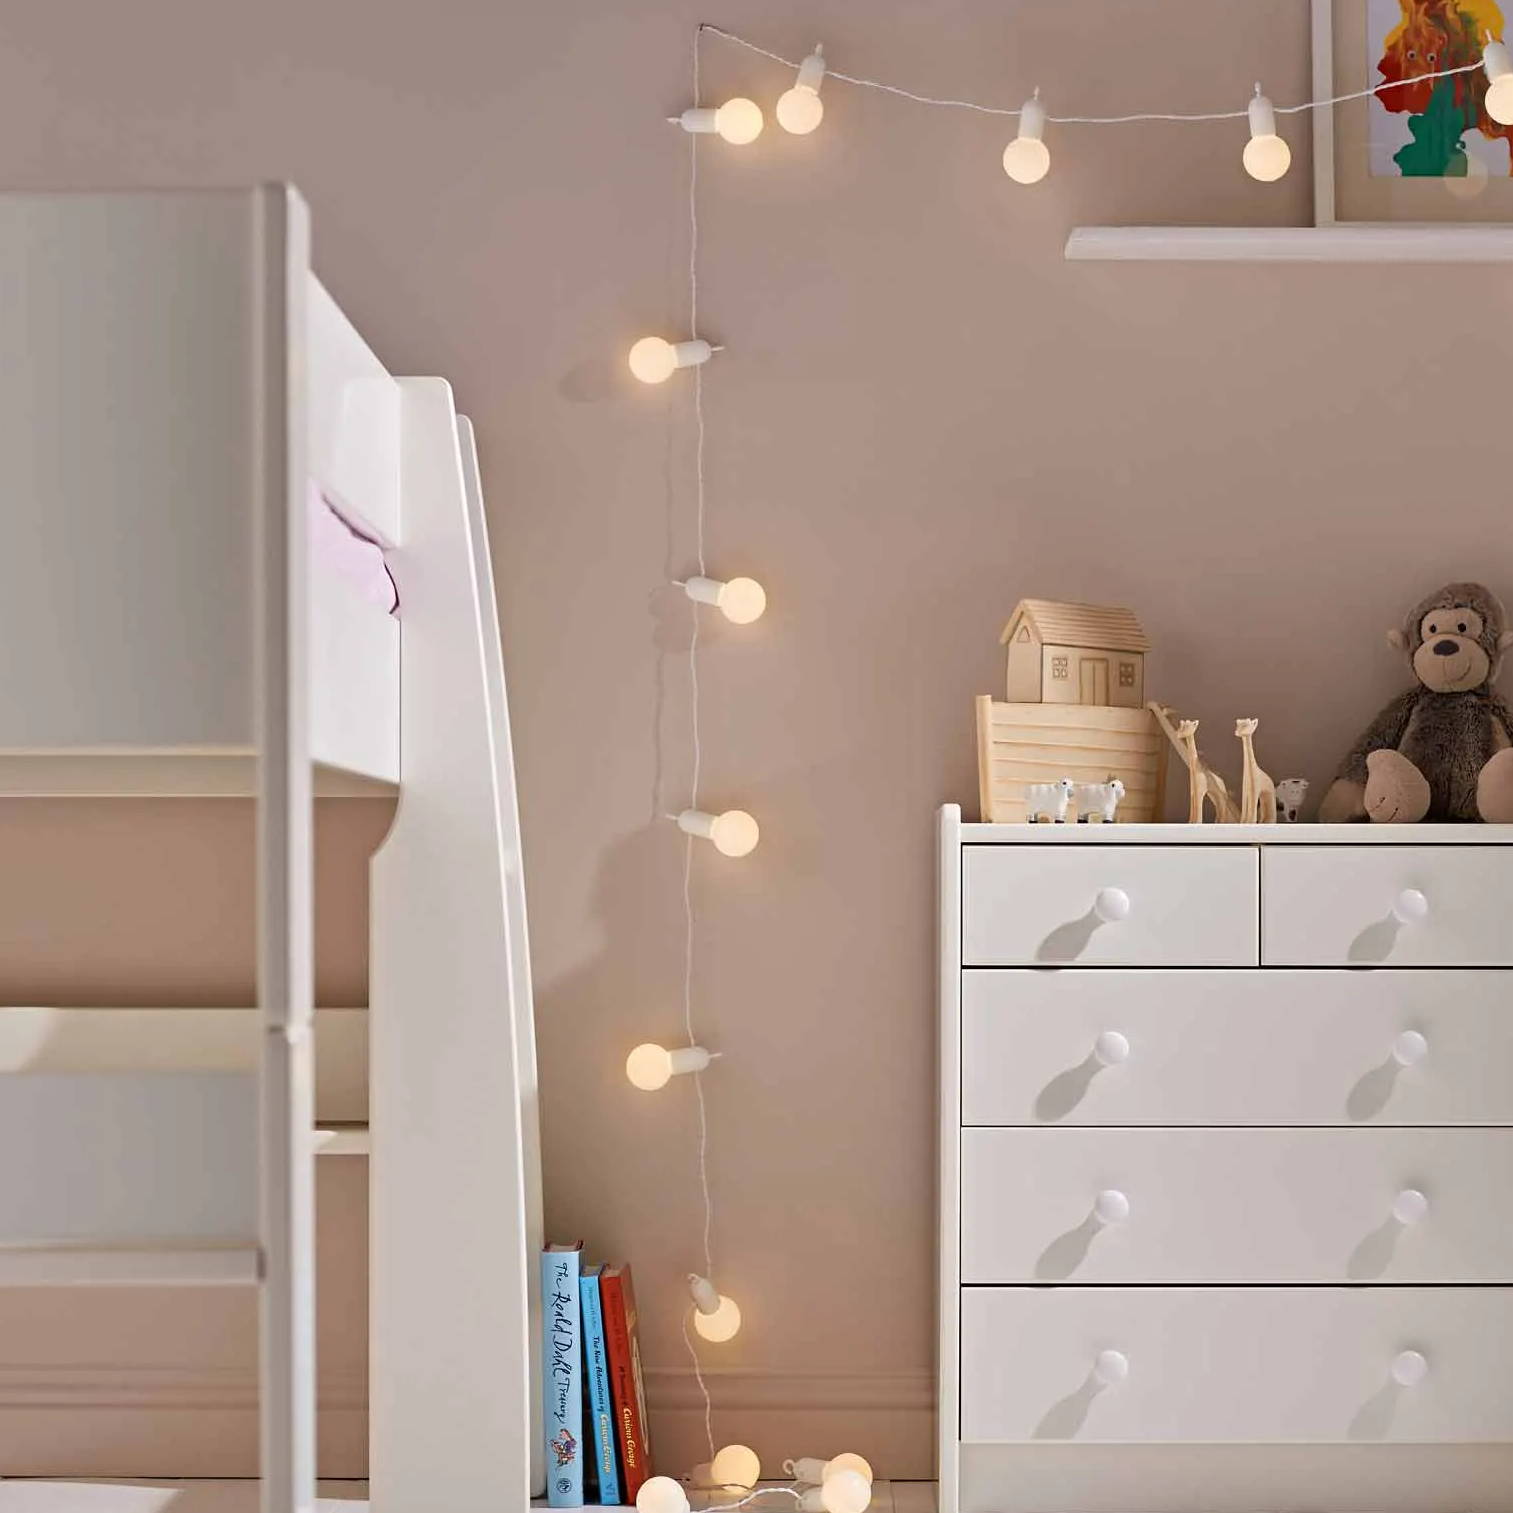 Festoon lights with white cable draped across children's bedroom wall